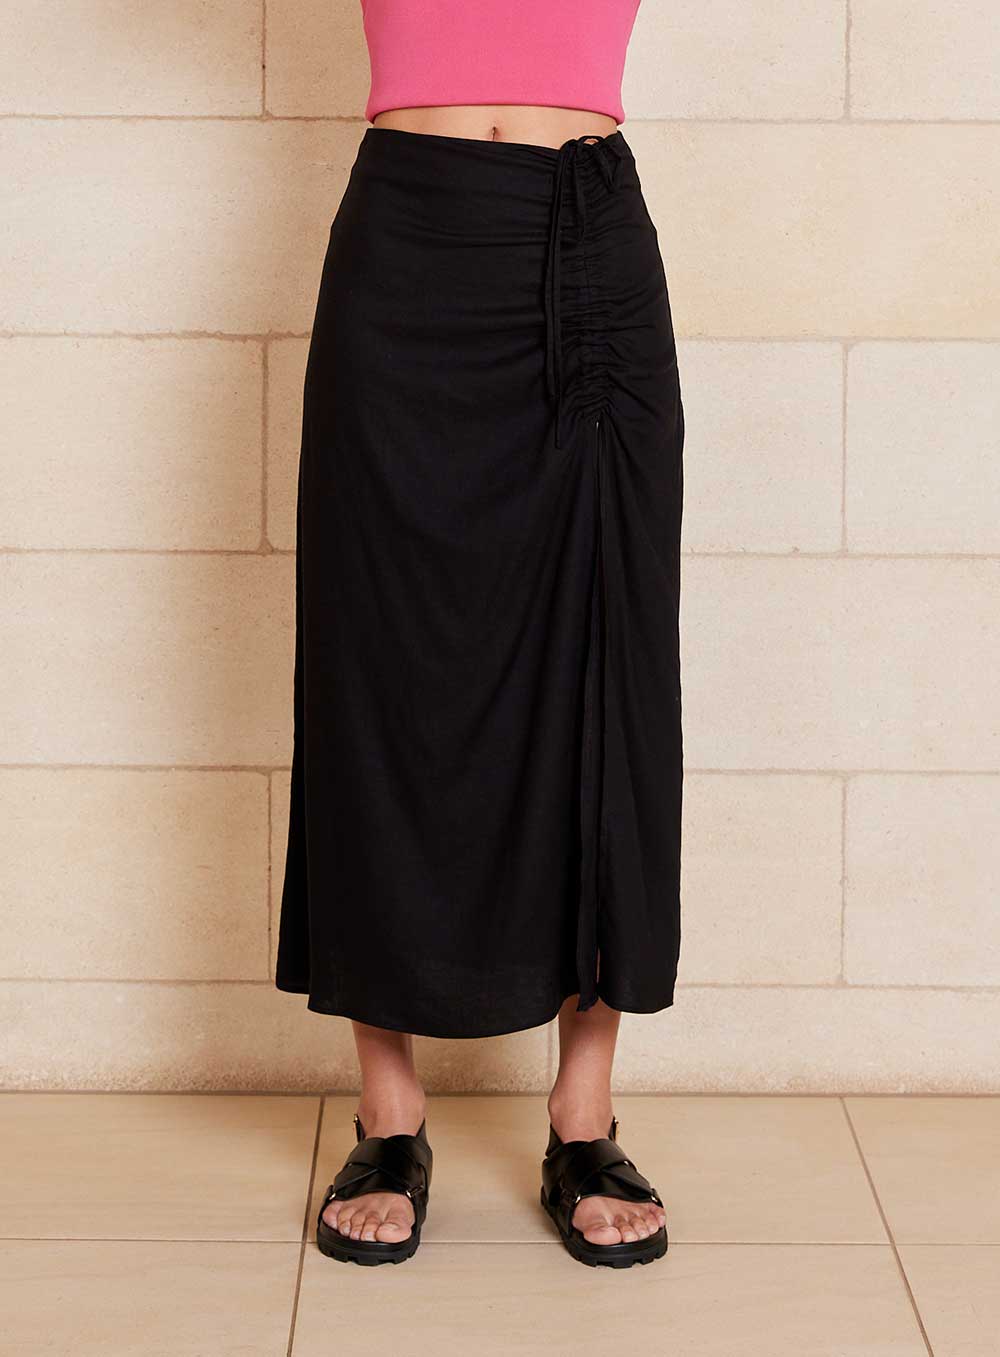 The Lily Skirt in black features a ruched split detailing that adds both shape and texture, functional ruching with tie leg splits and invisible zip back seam.